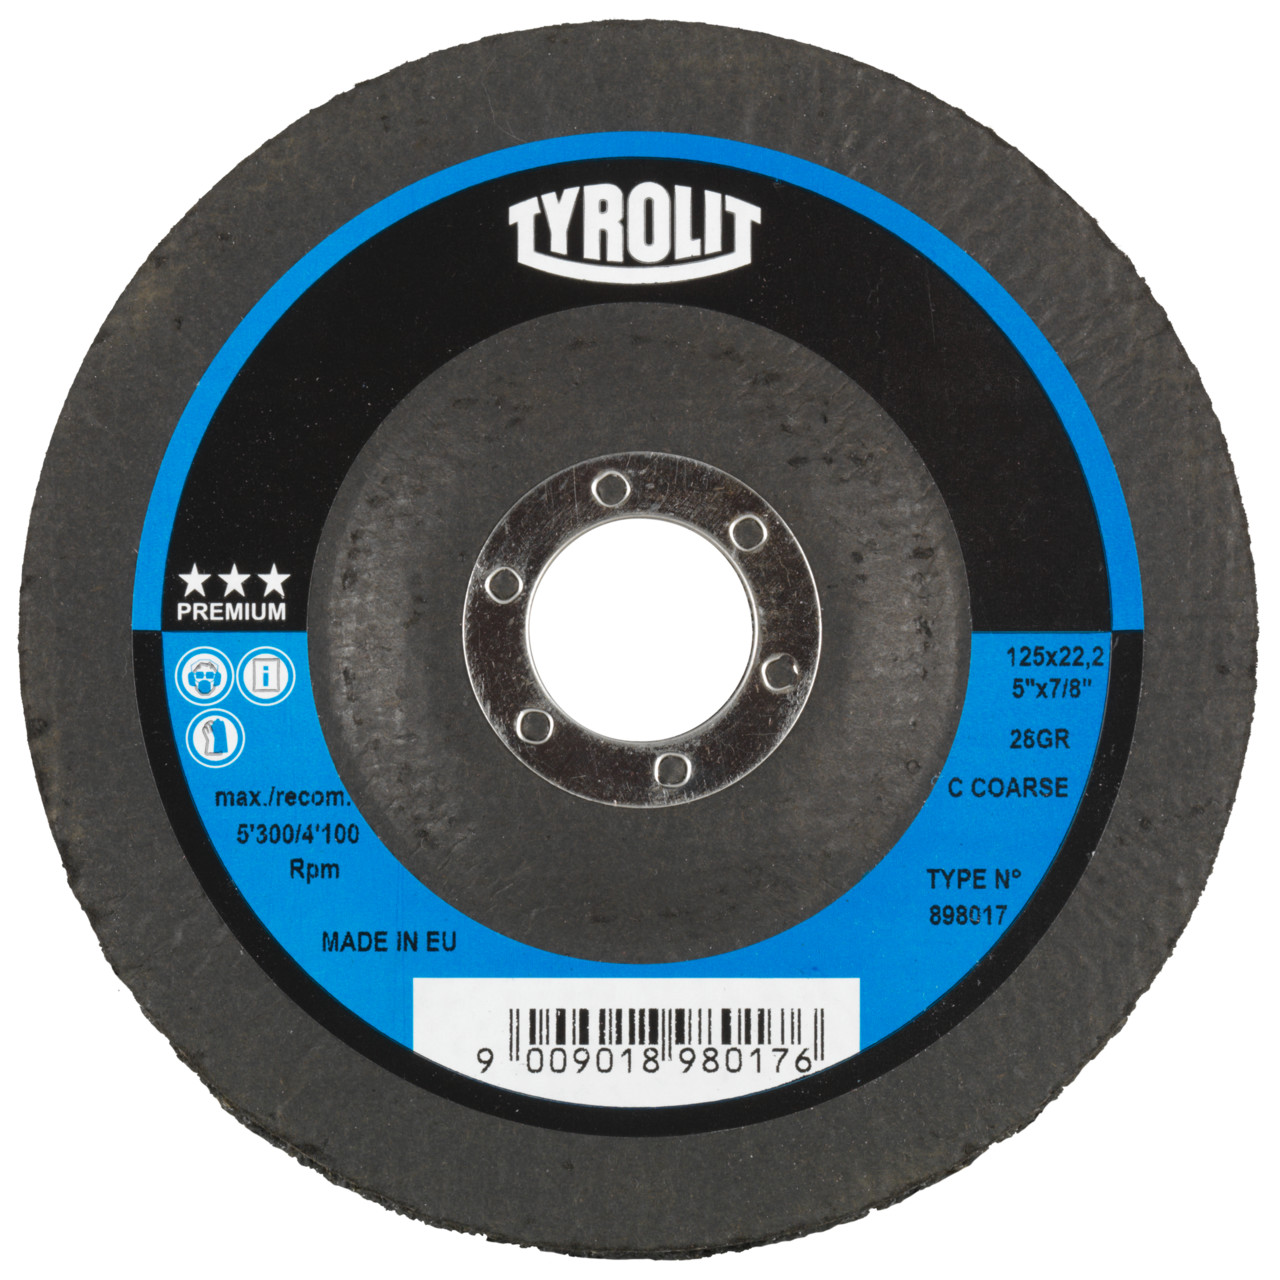 Tyrolit Coarse cleaning disc DxH 115x22.2 Universally applicable, C GROB, shape: 28- (coarse cleaning disc), Art. 898014